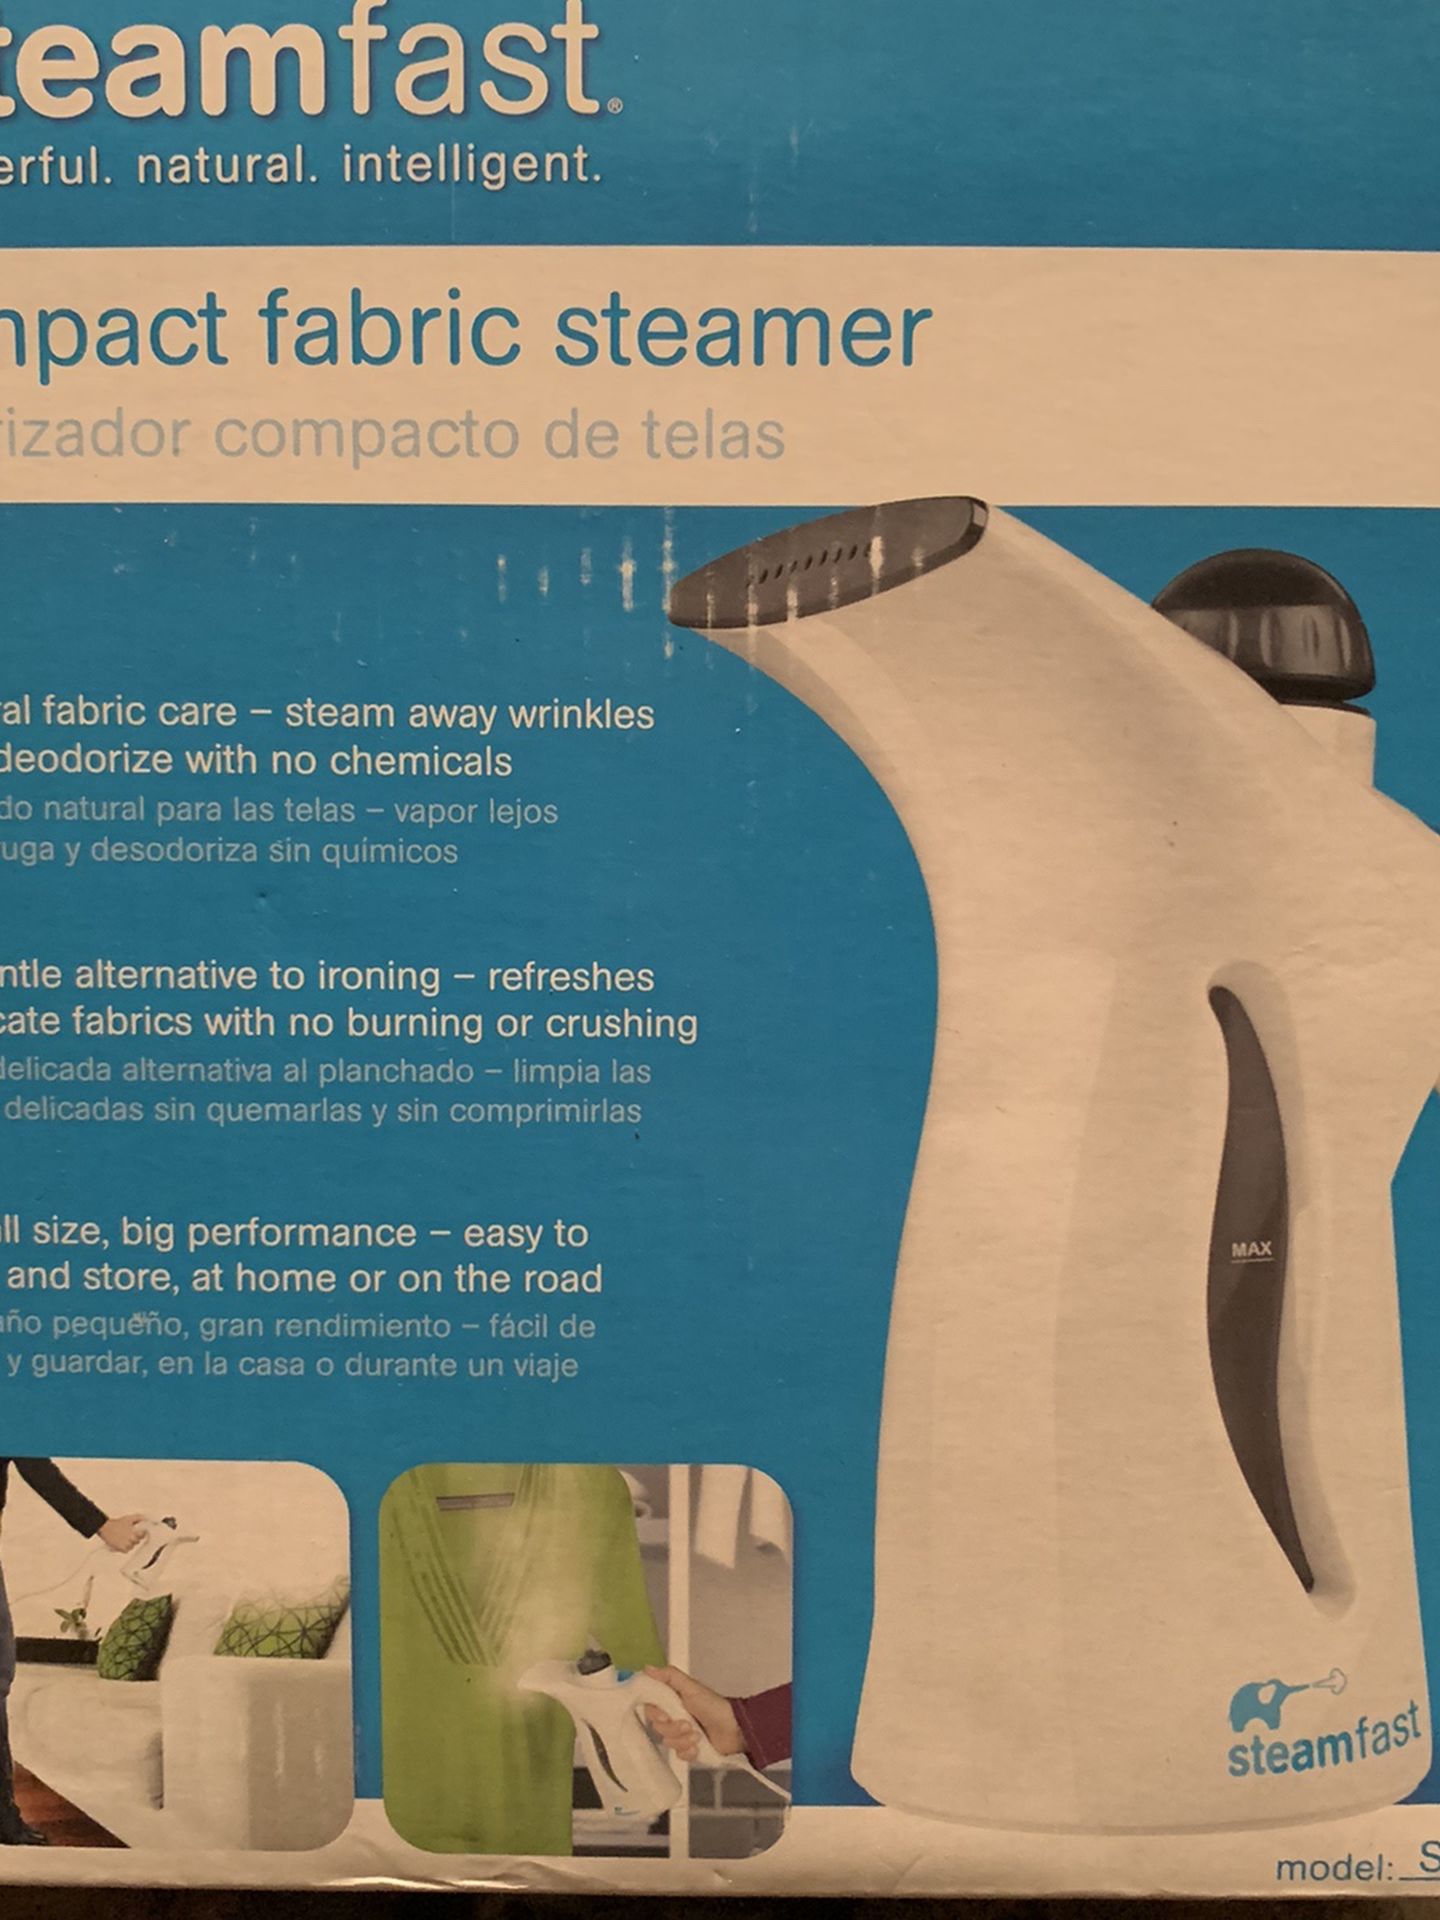 Compact fabric steamer